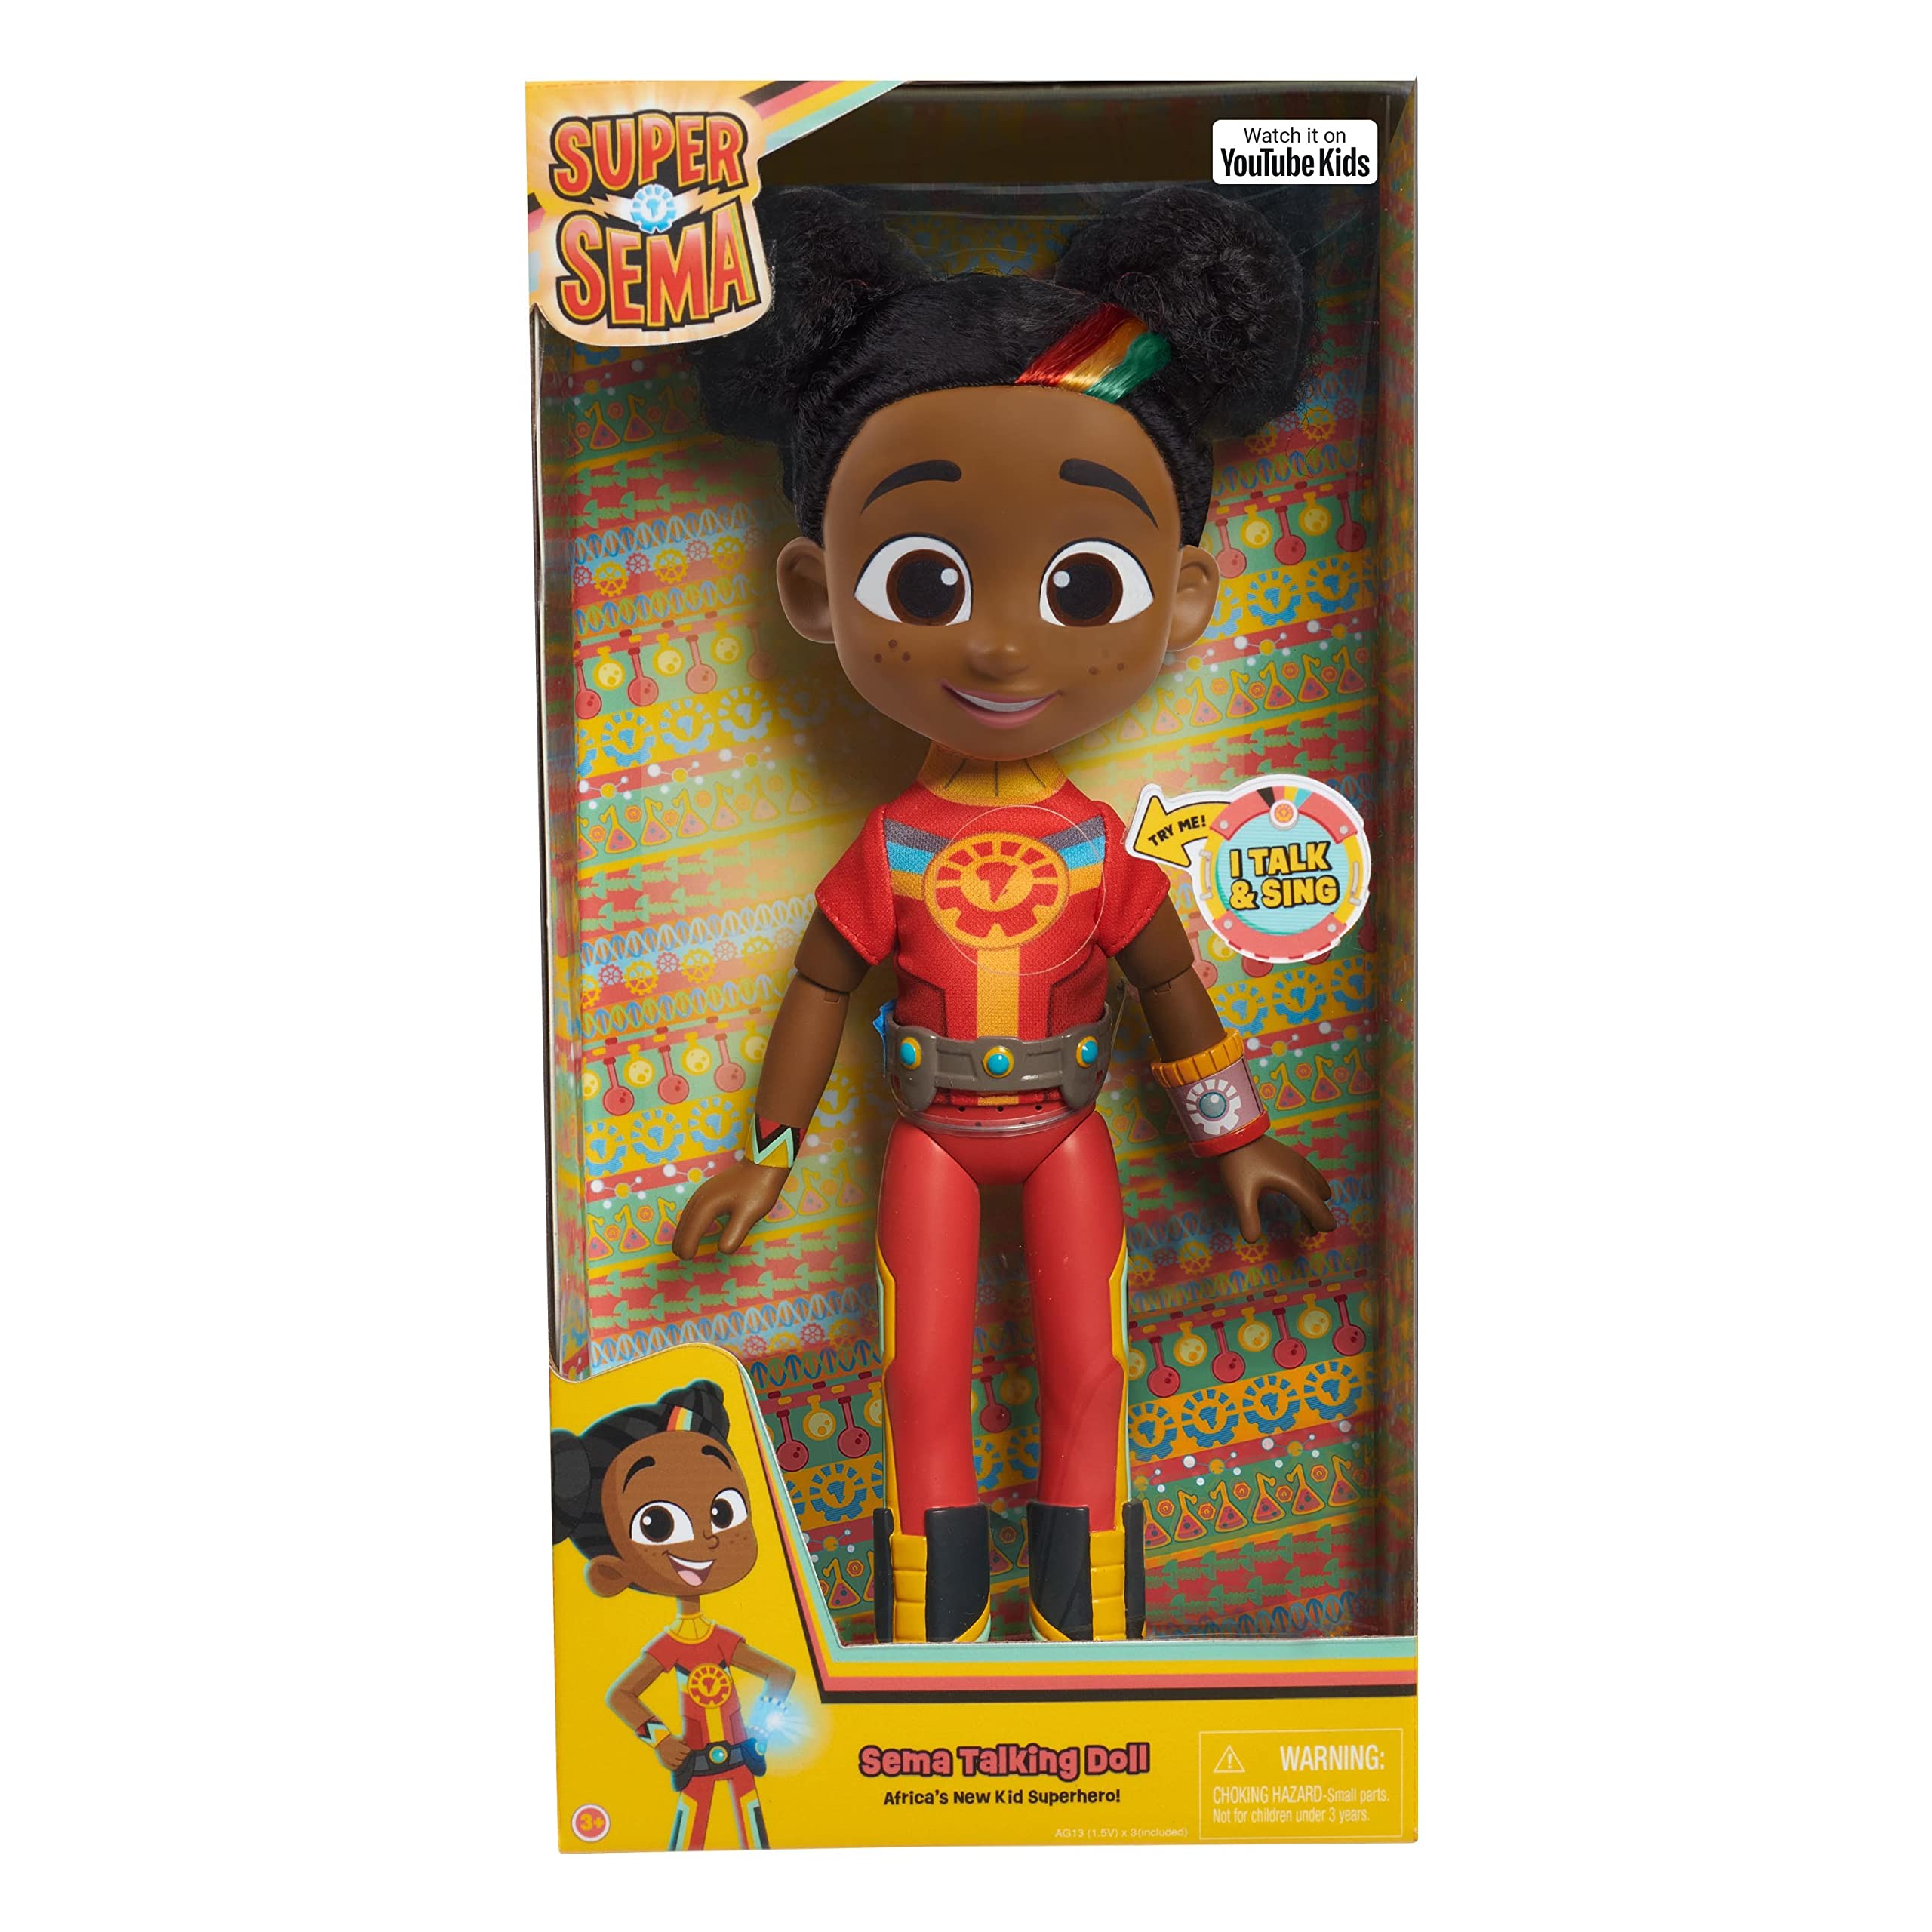 SUPER SEMA 12-inch Talking and Singing Doll and Accessories, Kids Toys for Ages 3 Up, Gifts and Presents by Just Play